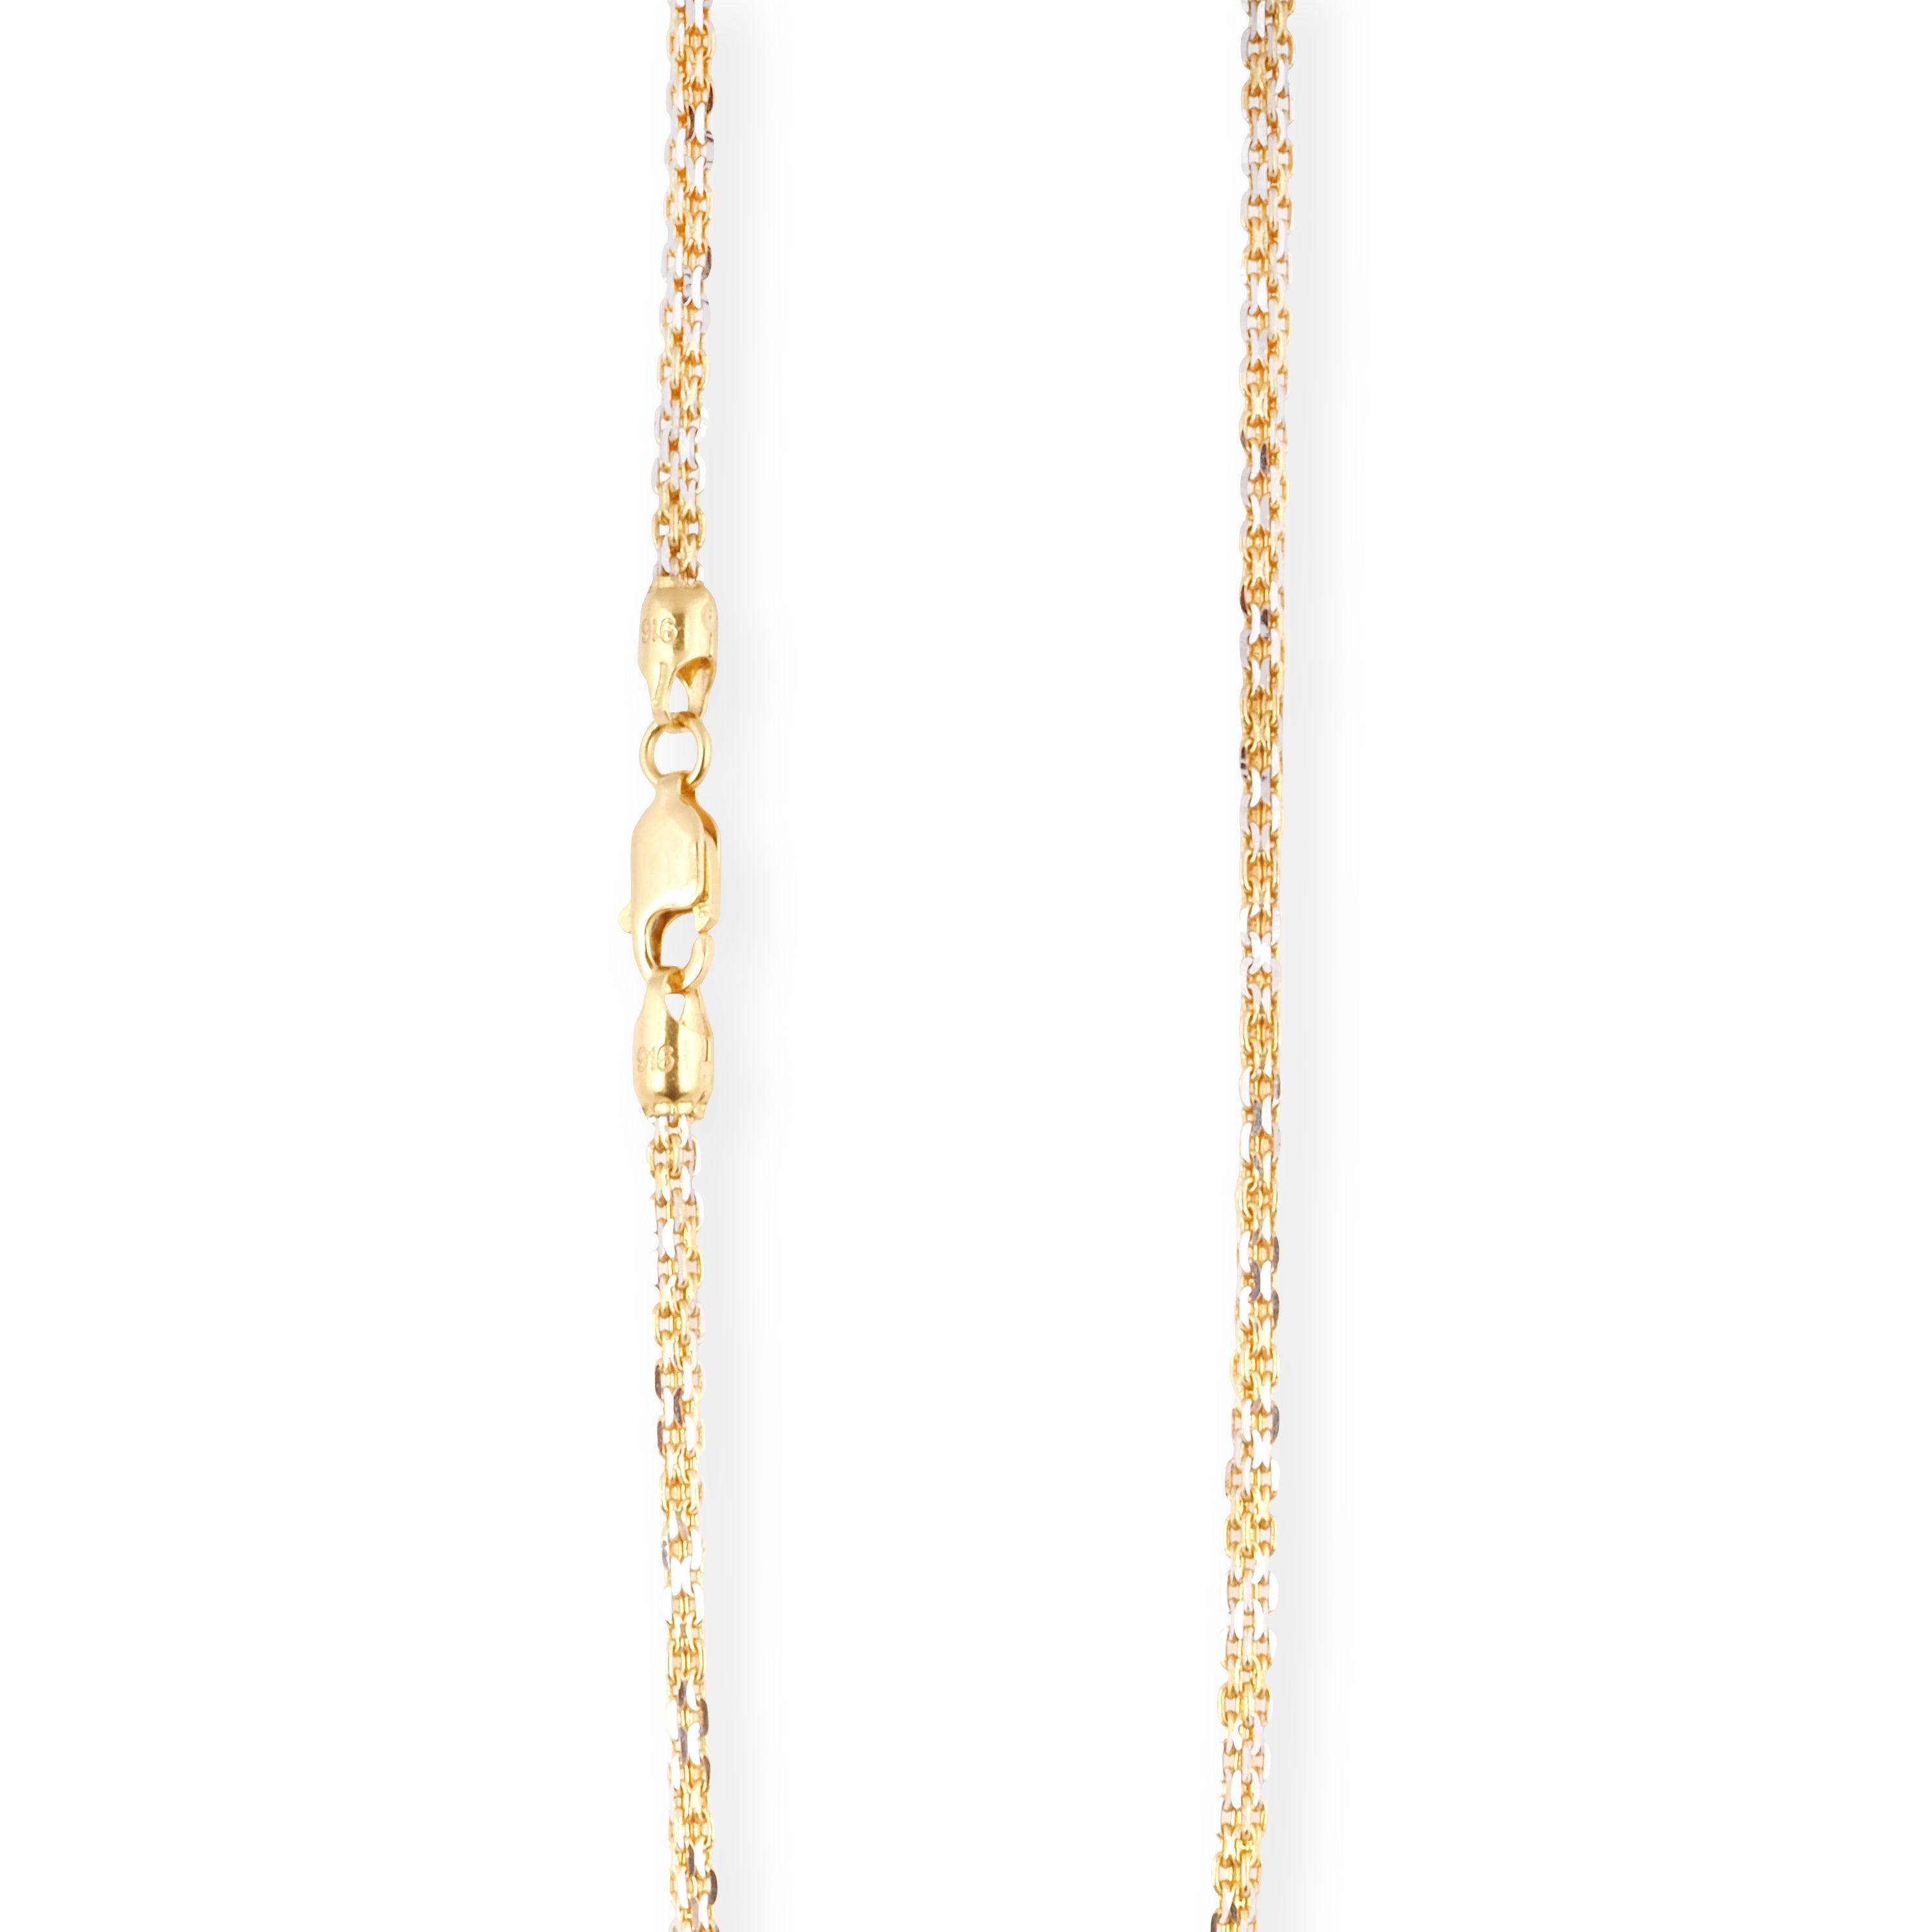 22ct Gold Box Chain with Rhodium Plating & Lobster Clasp C-7004 - Minar Jewellers